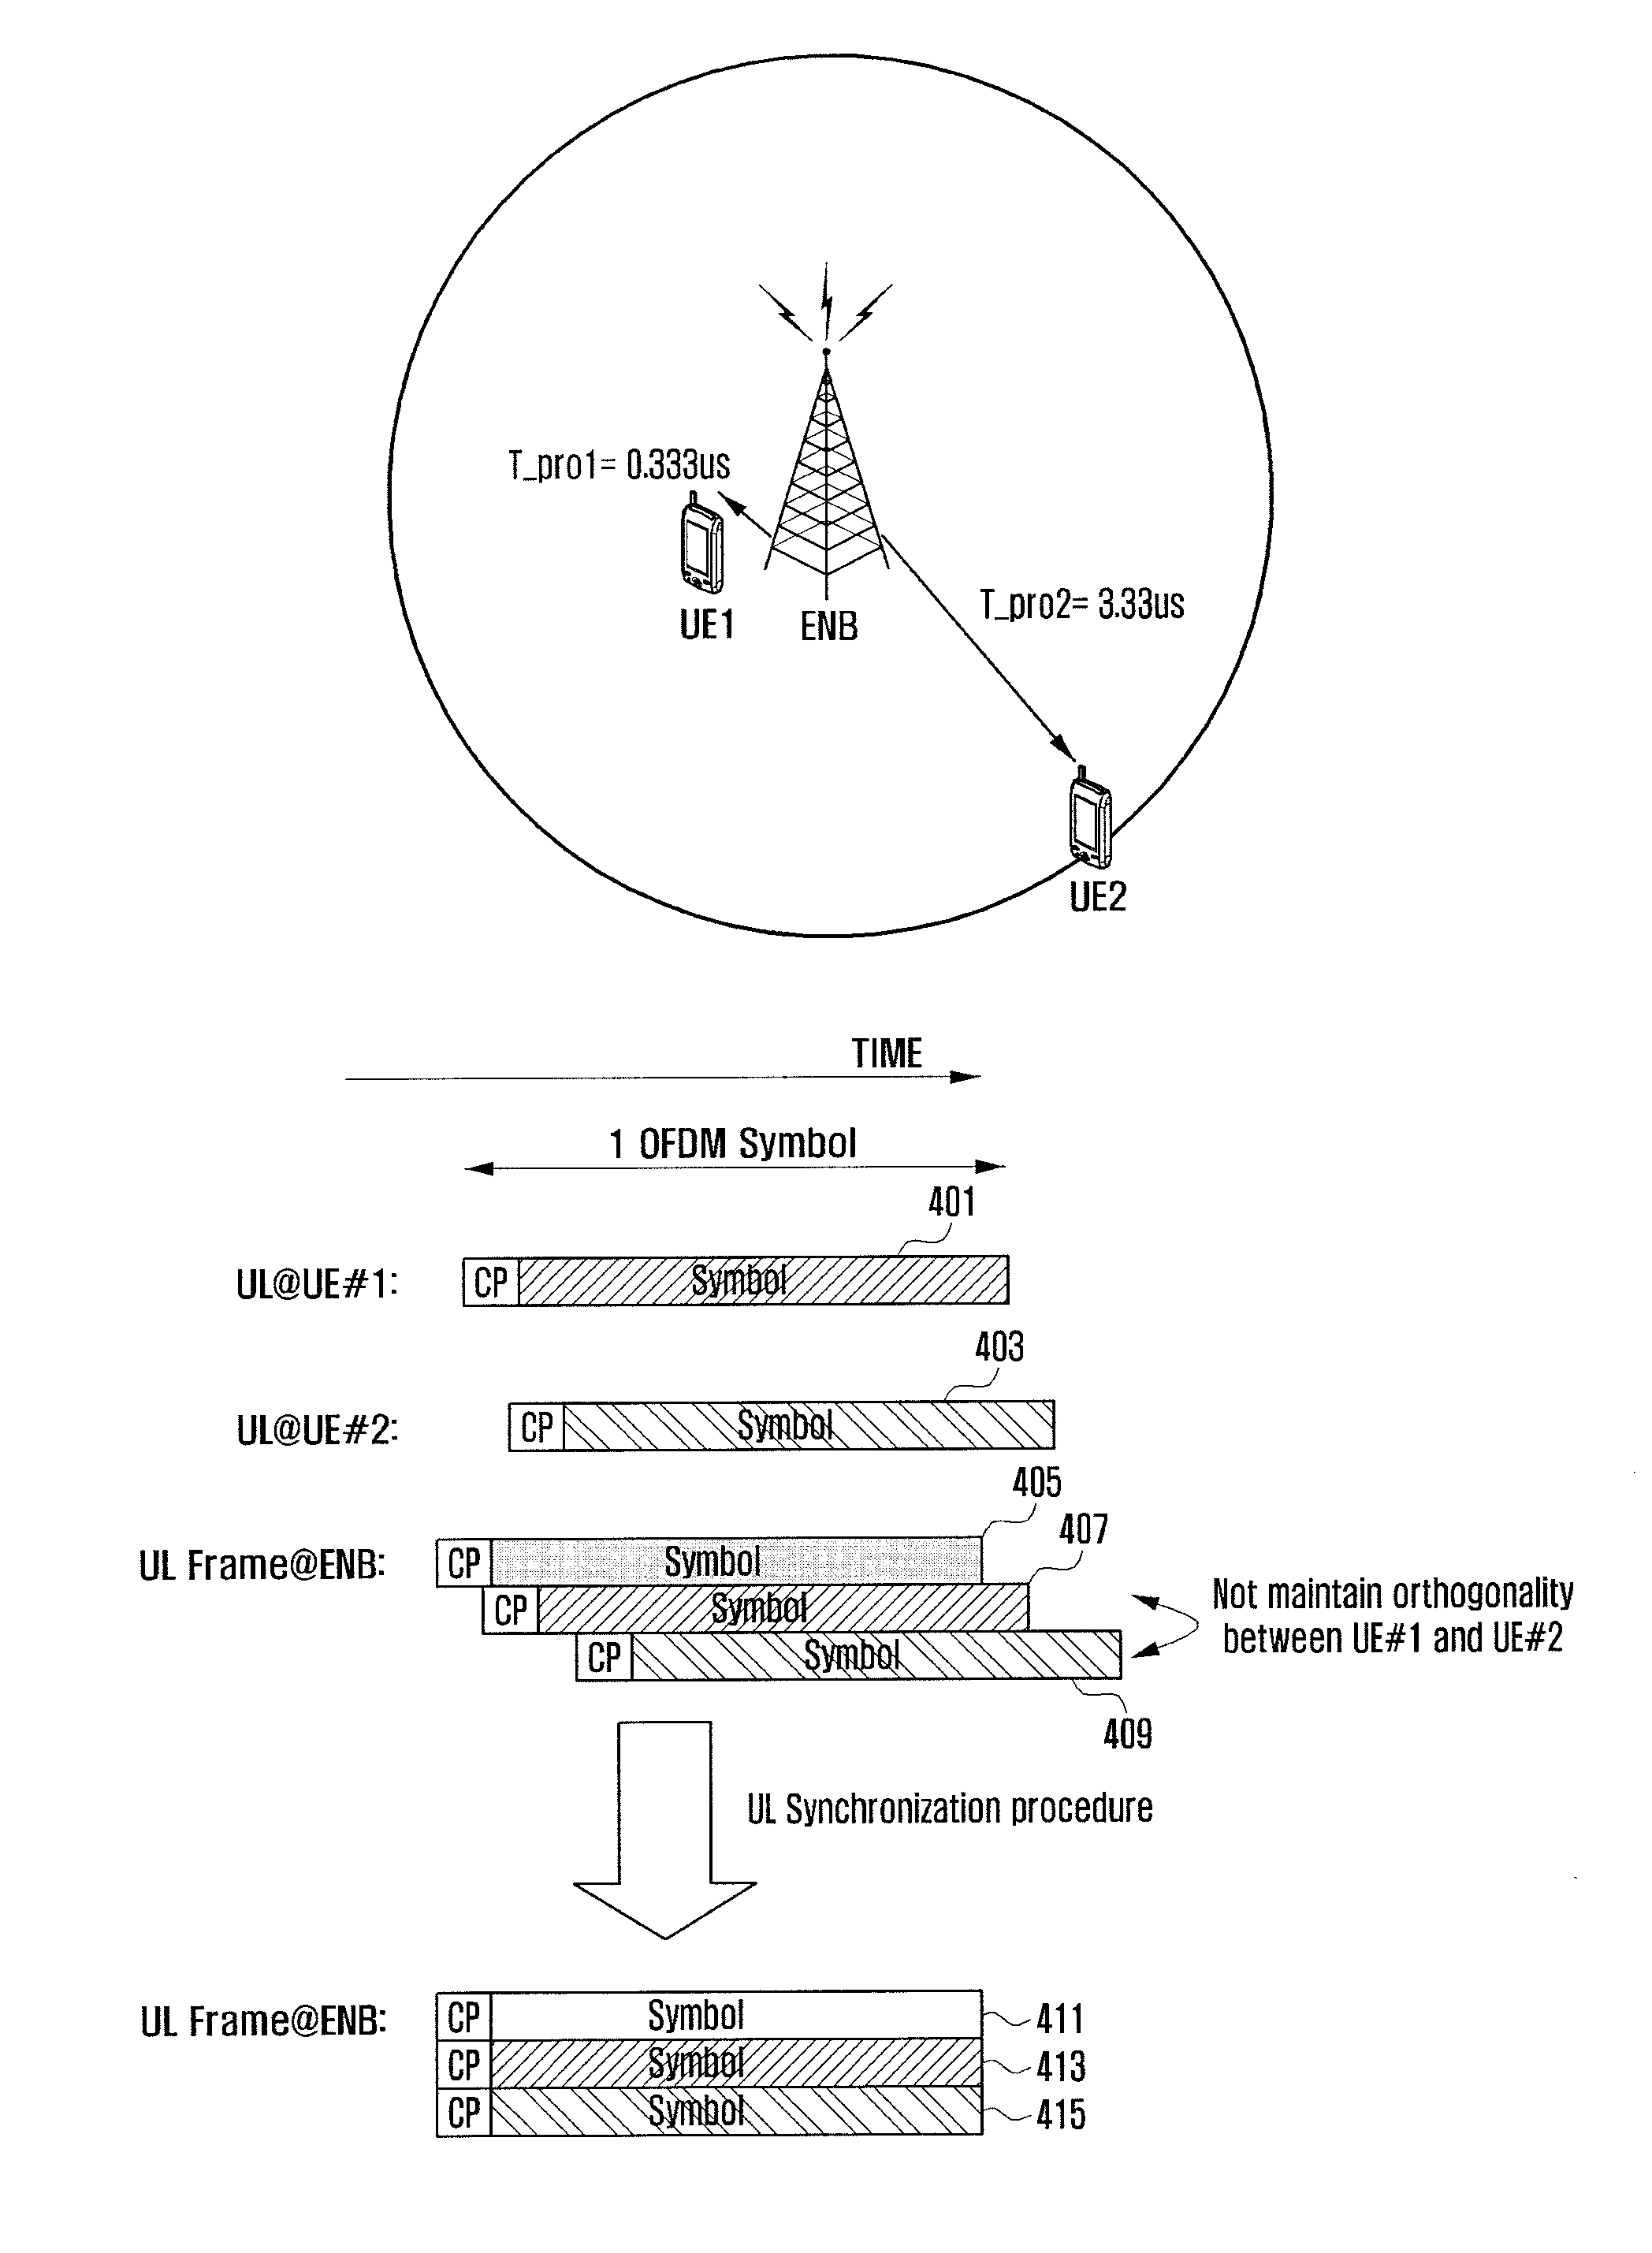 Method and apparatus for reducing uplink transmission delay in wireless communication system using carrier aggregation